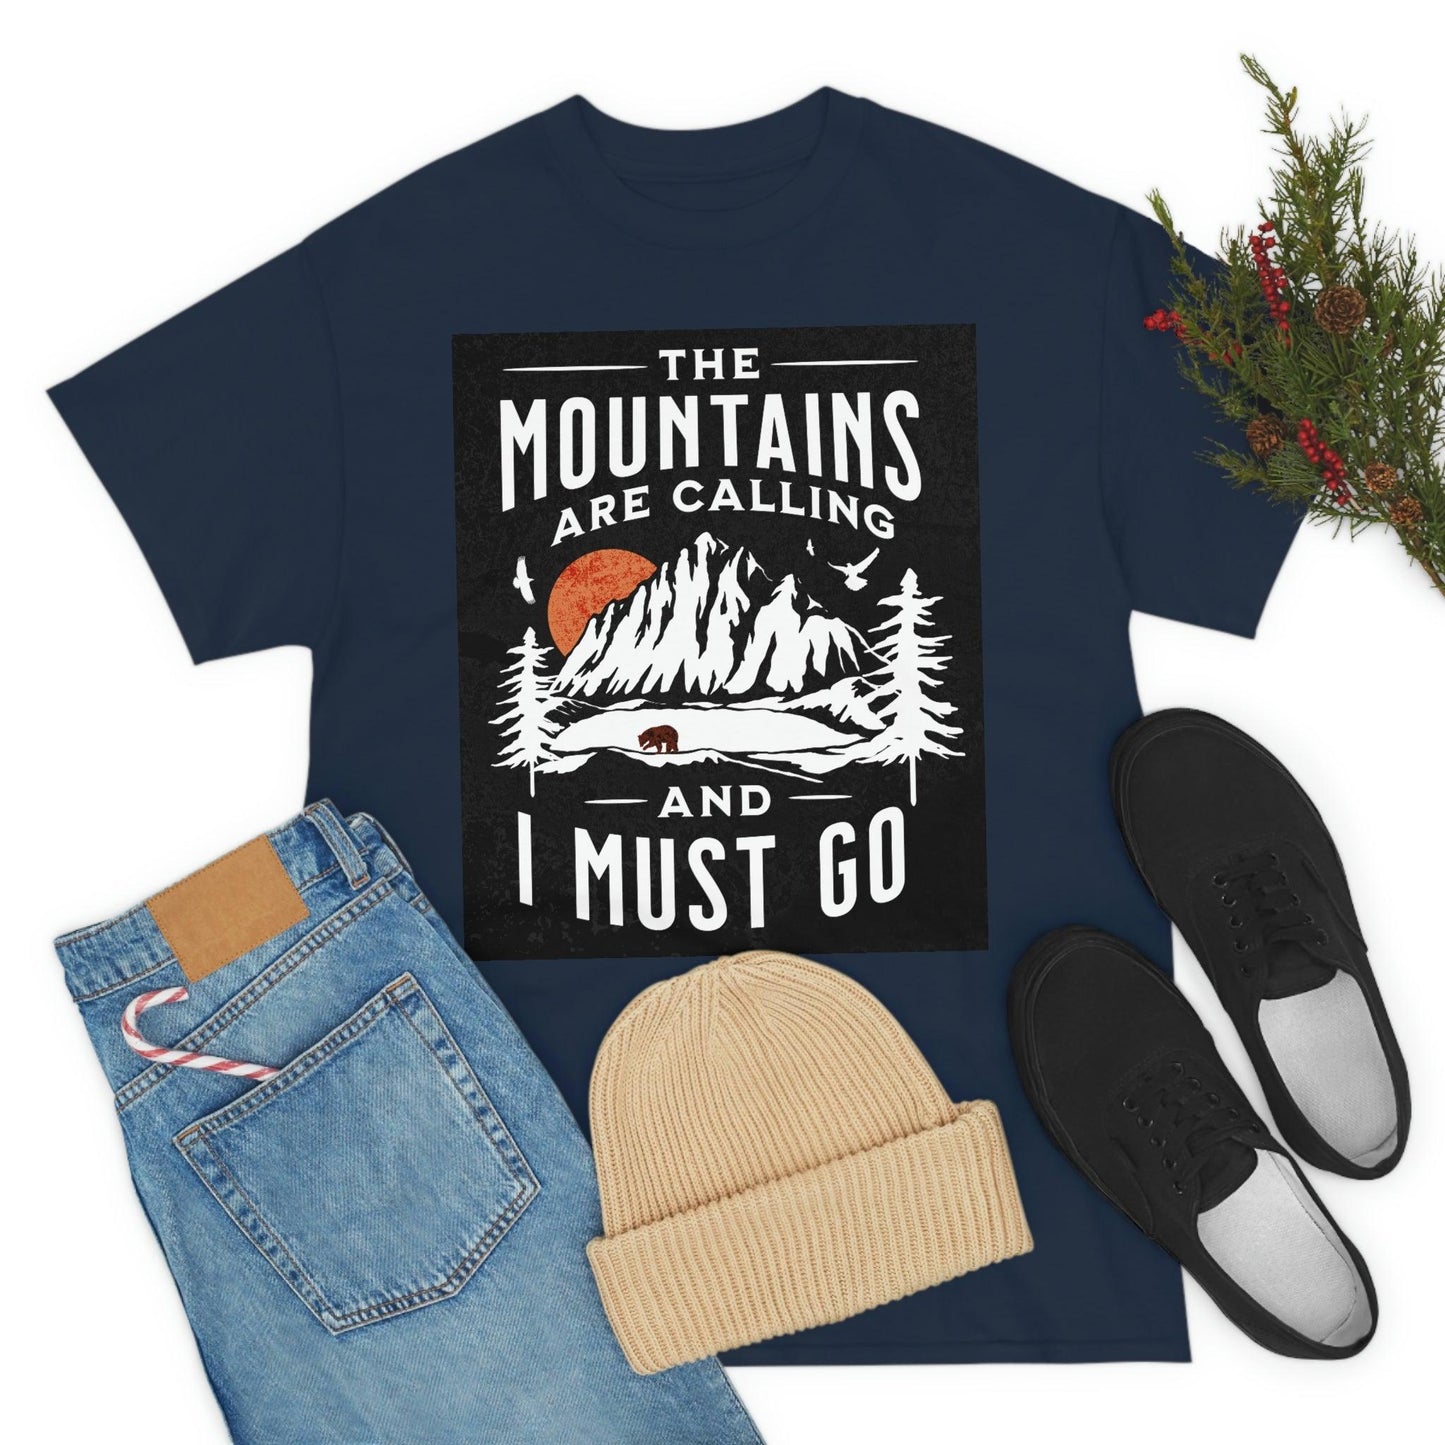 The Mountains are calling Tee